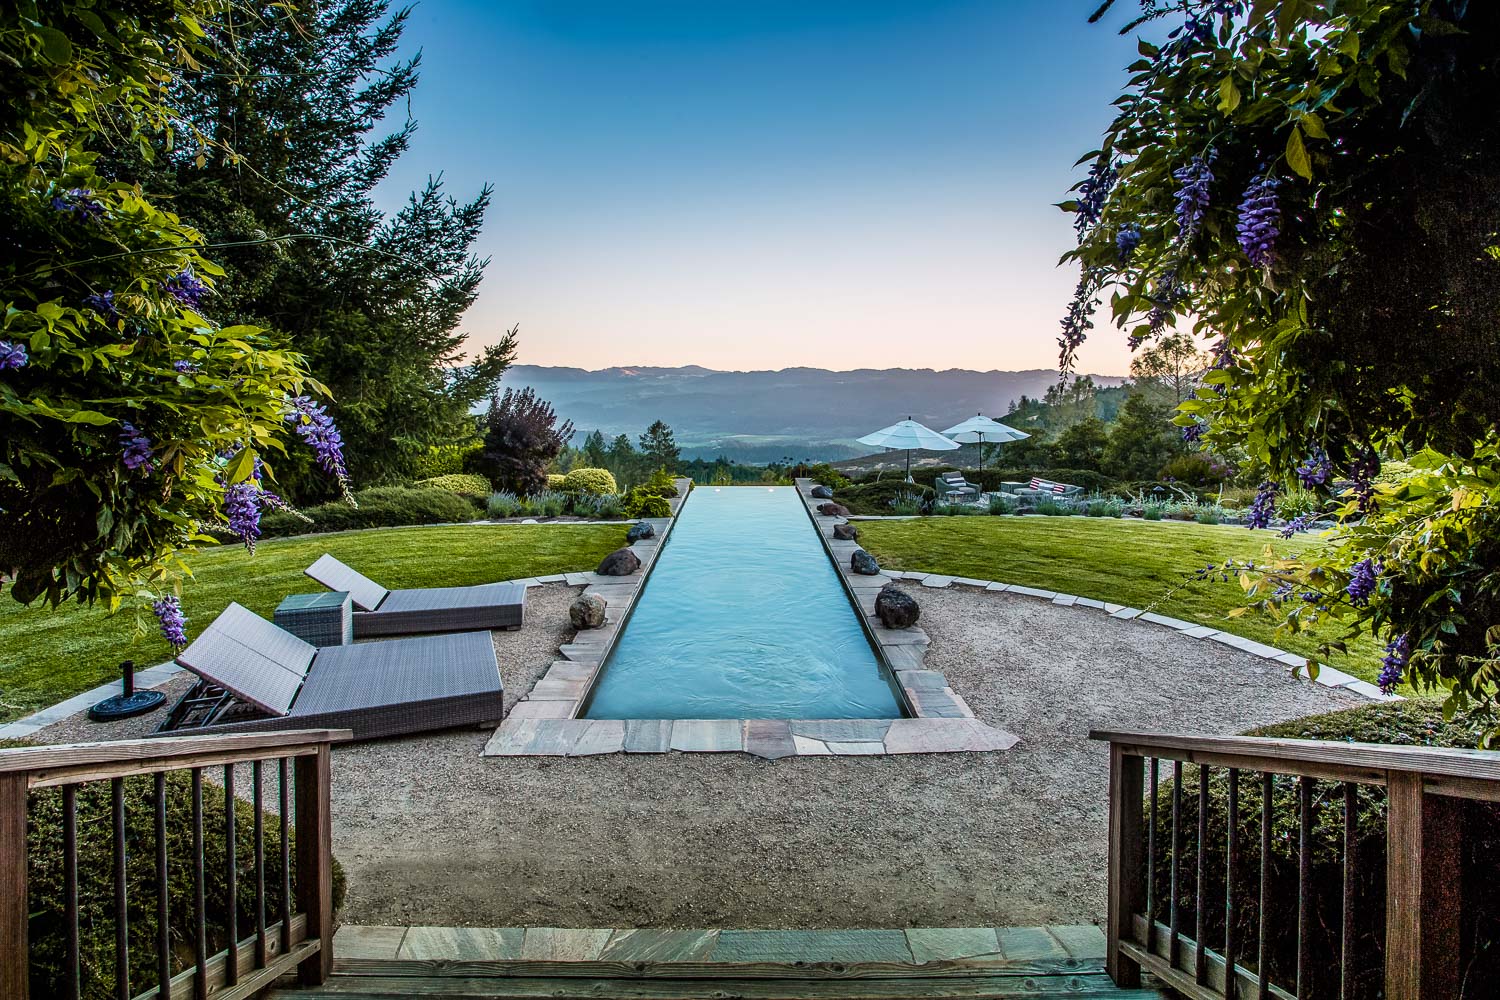 Exquisite Poolside Retreat: Luxurious Pool with Captivating Napa Valley Views at a Premier Vacation Rental